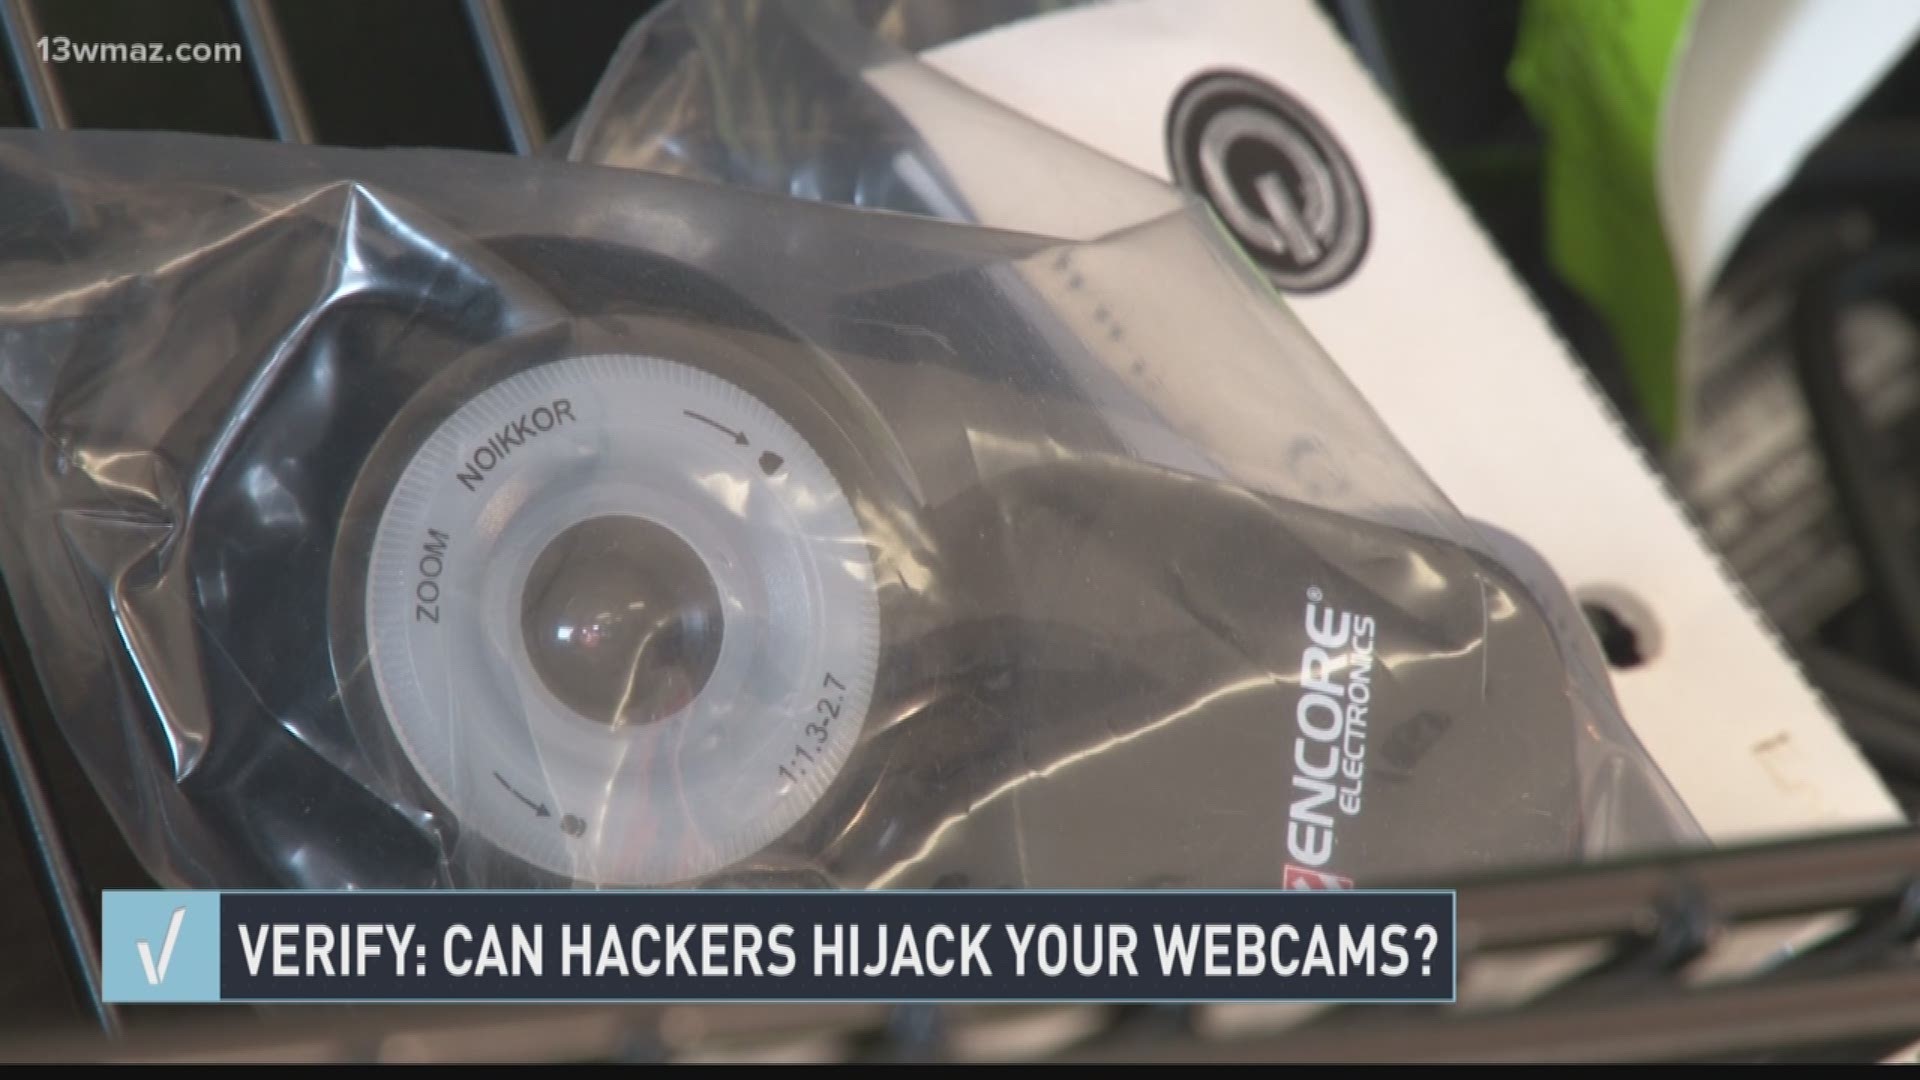 VERIFY: Can hackers hijack your webcams?